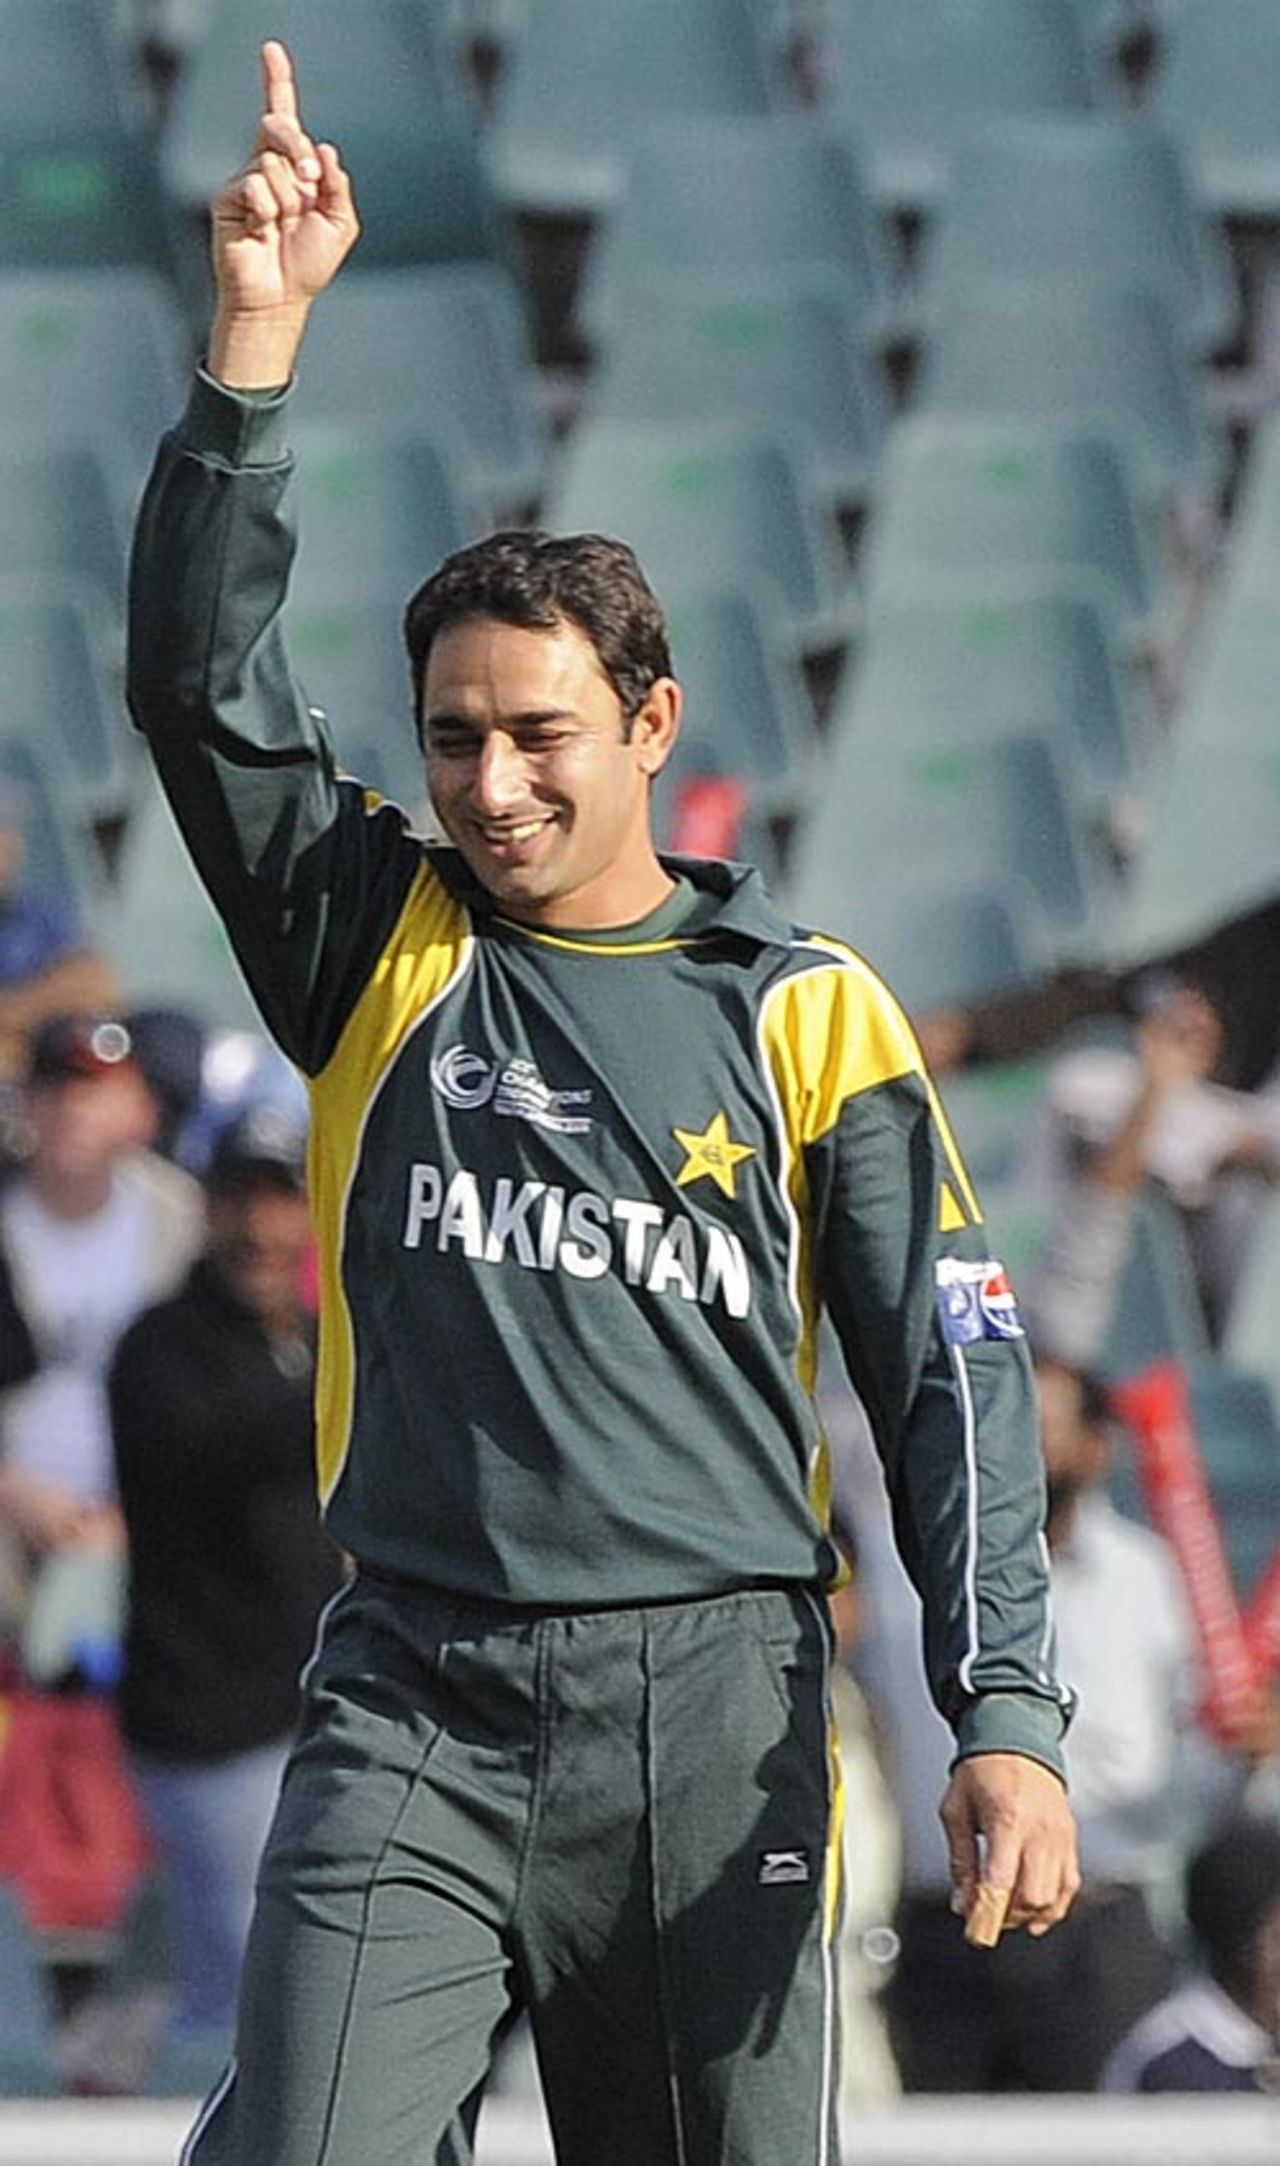 Saeed Ajmal got a wicket in his first over, Pakistan v West Indies, Champions Trophy, Group A, Johannesburg, September 23, 2009